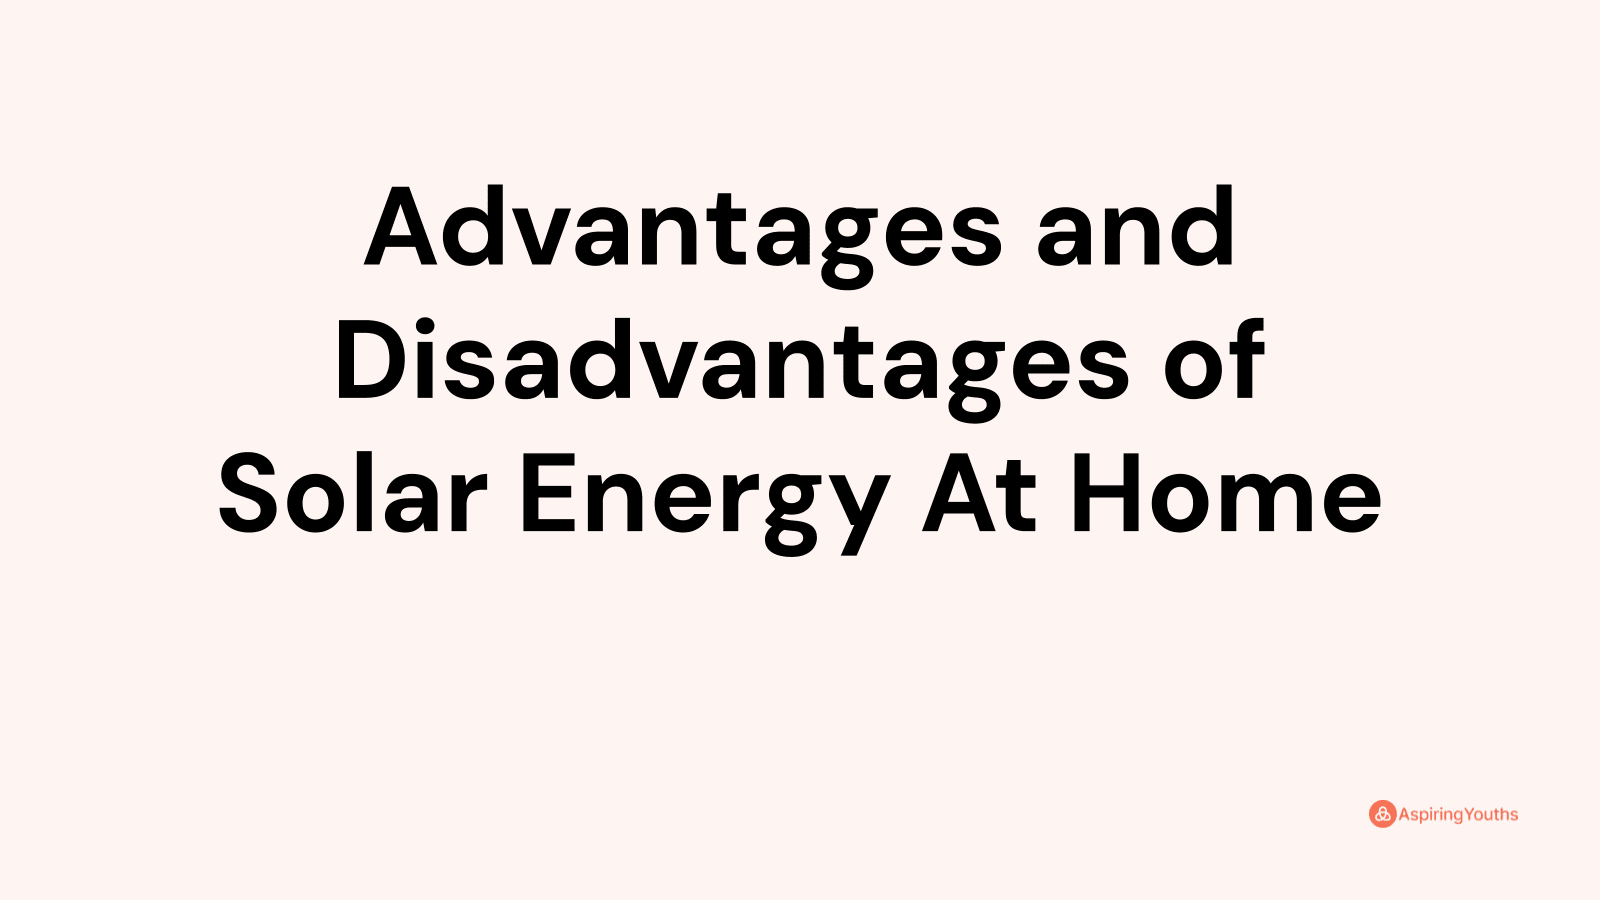 Advantages and disadvantages of Solar Energy At Home